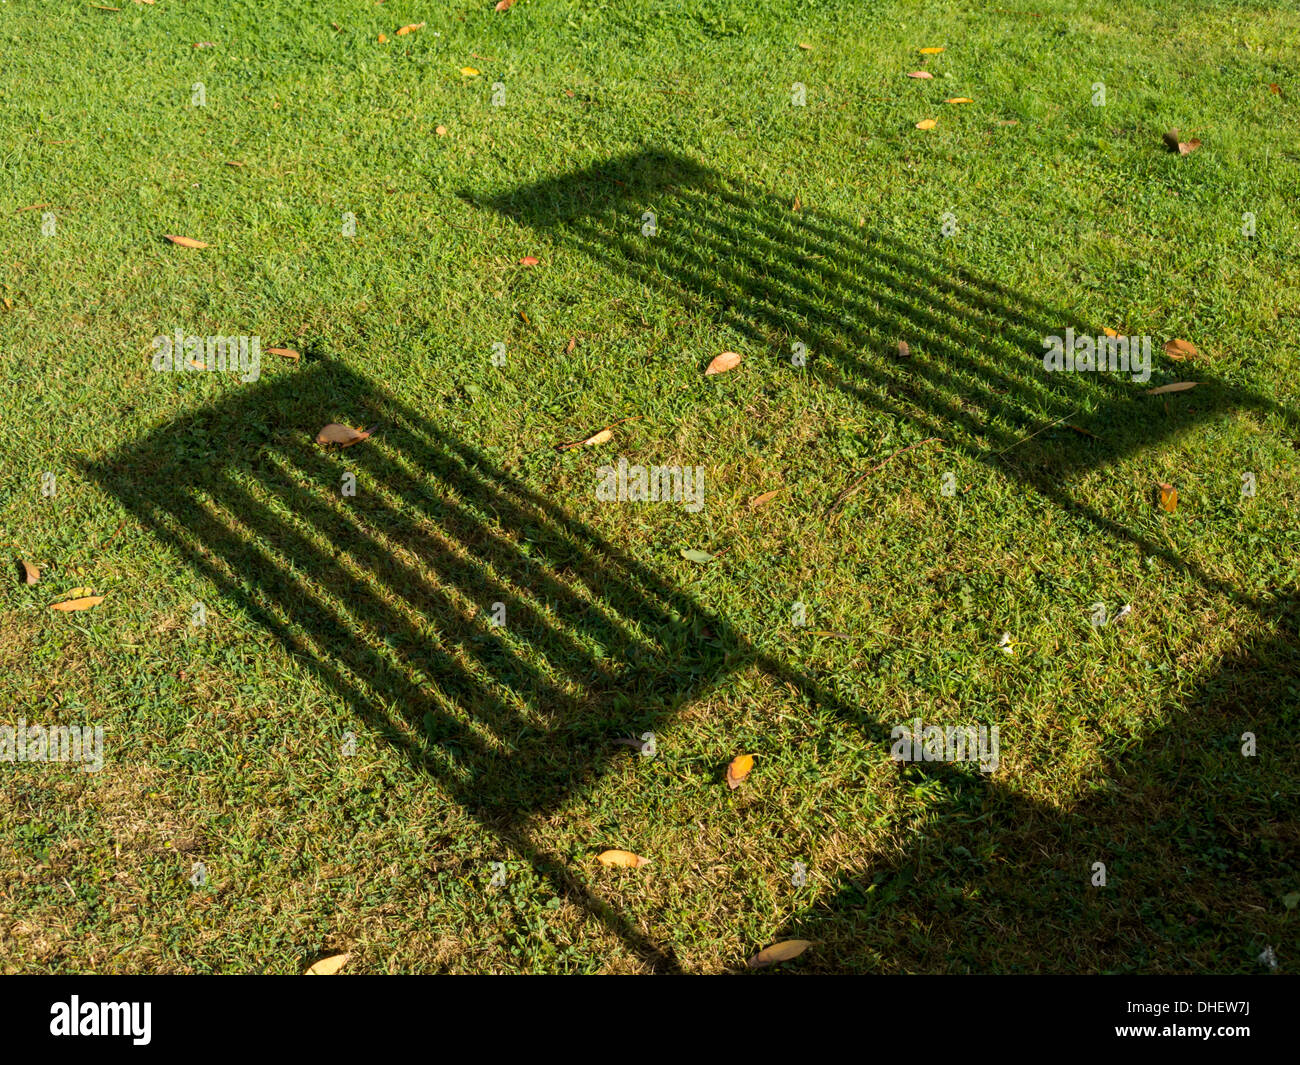 shadows of garden chairs backs cast by the sun falling on grass floor England Stock Photo